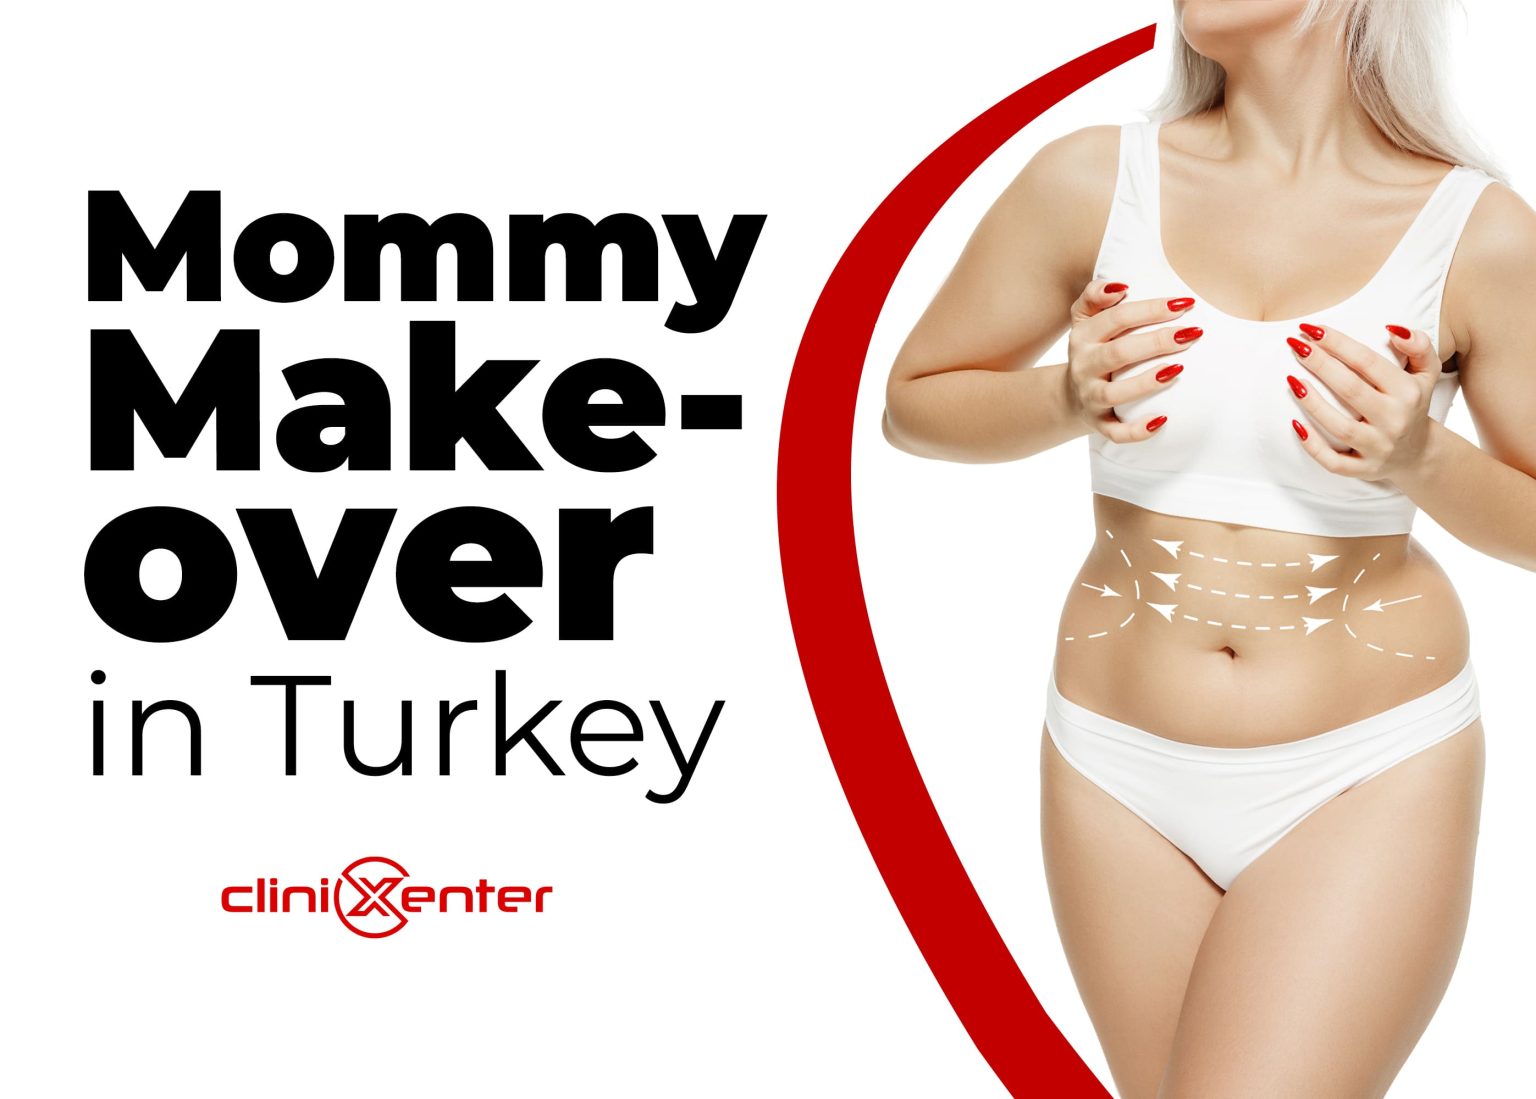 mommy makeover in Turkey, mommy makeover in Istanbul, mommy makeover surgery in Turkey